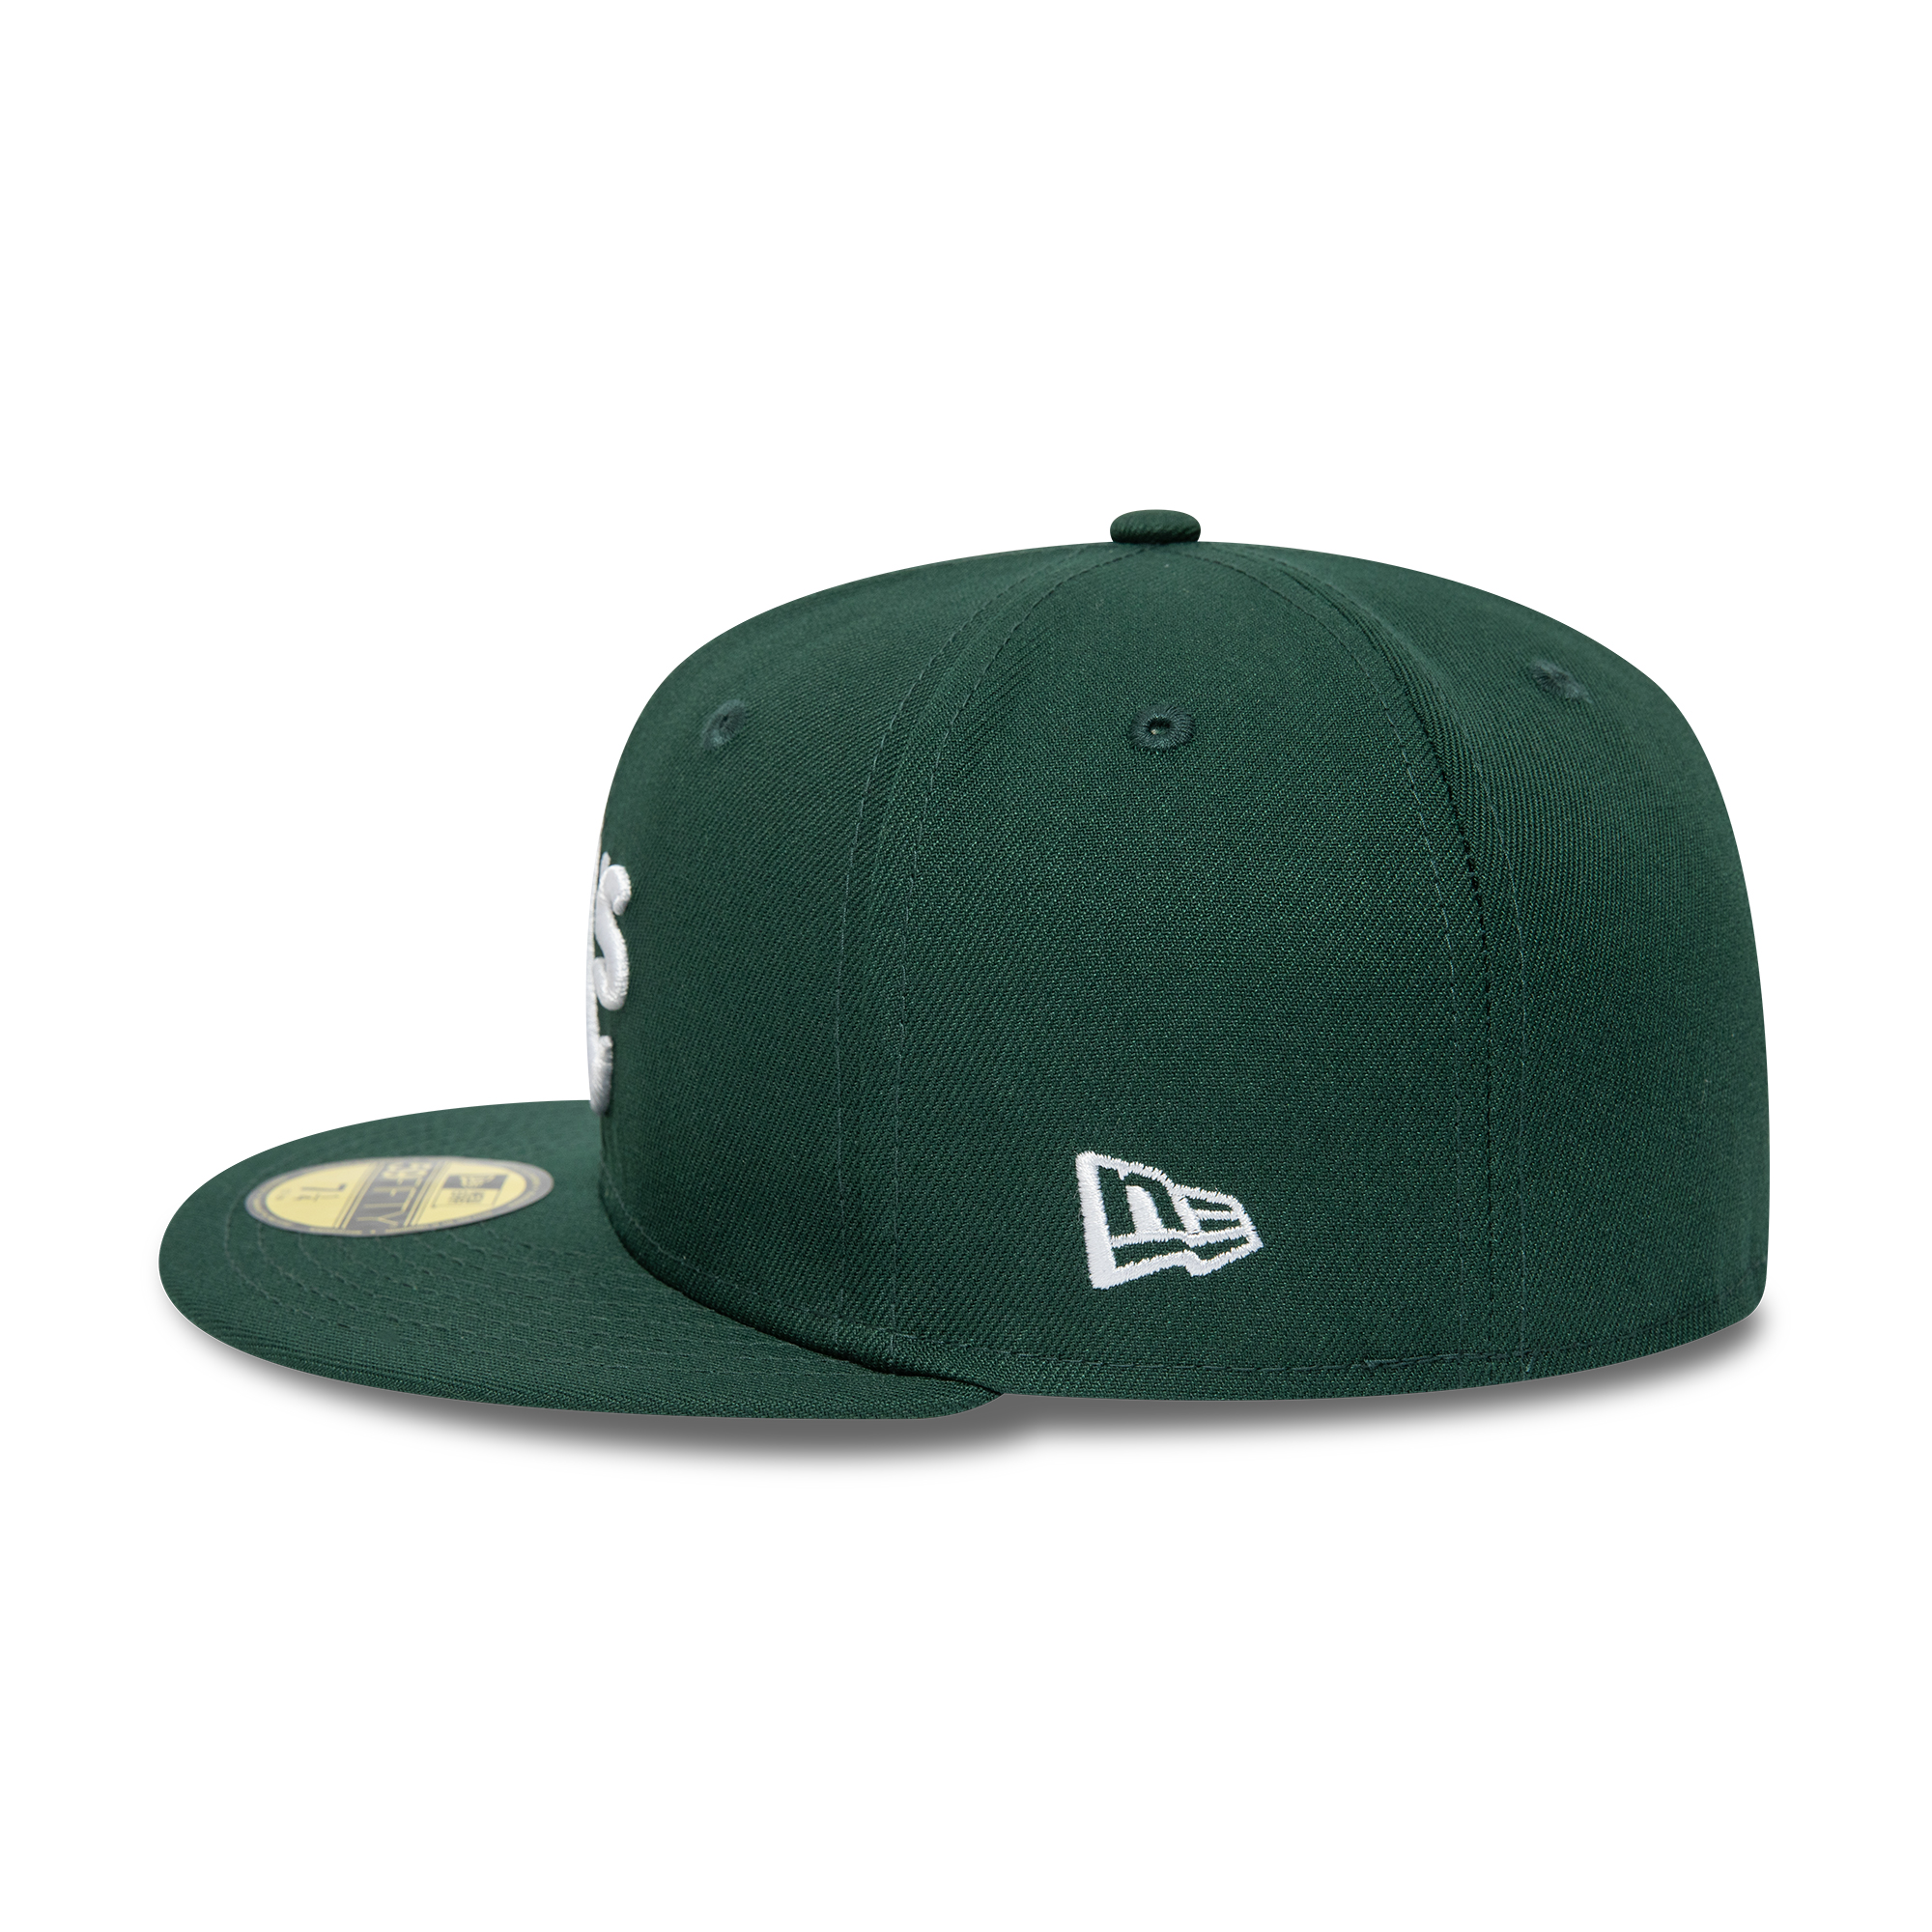 Oakland Athletics American League Stadium Dark Green 59FIFTY Fitted Cap